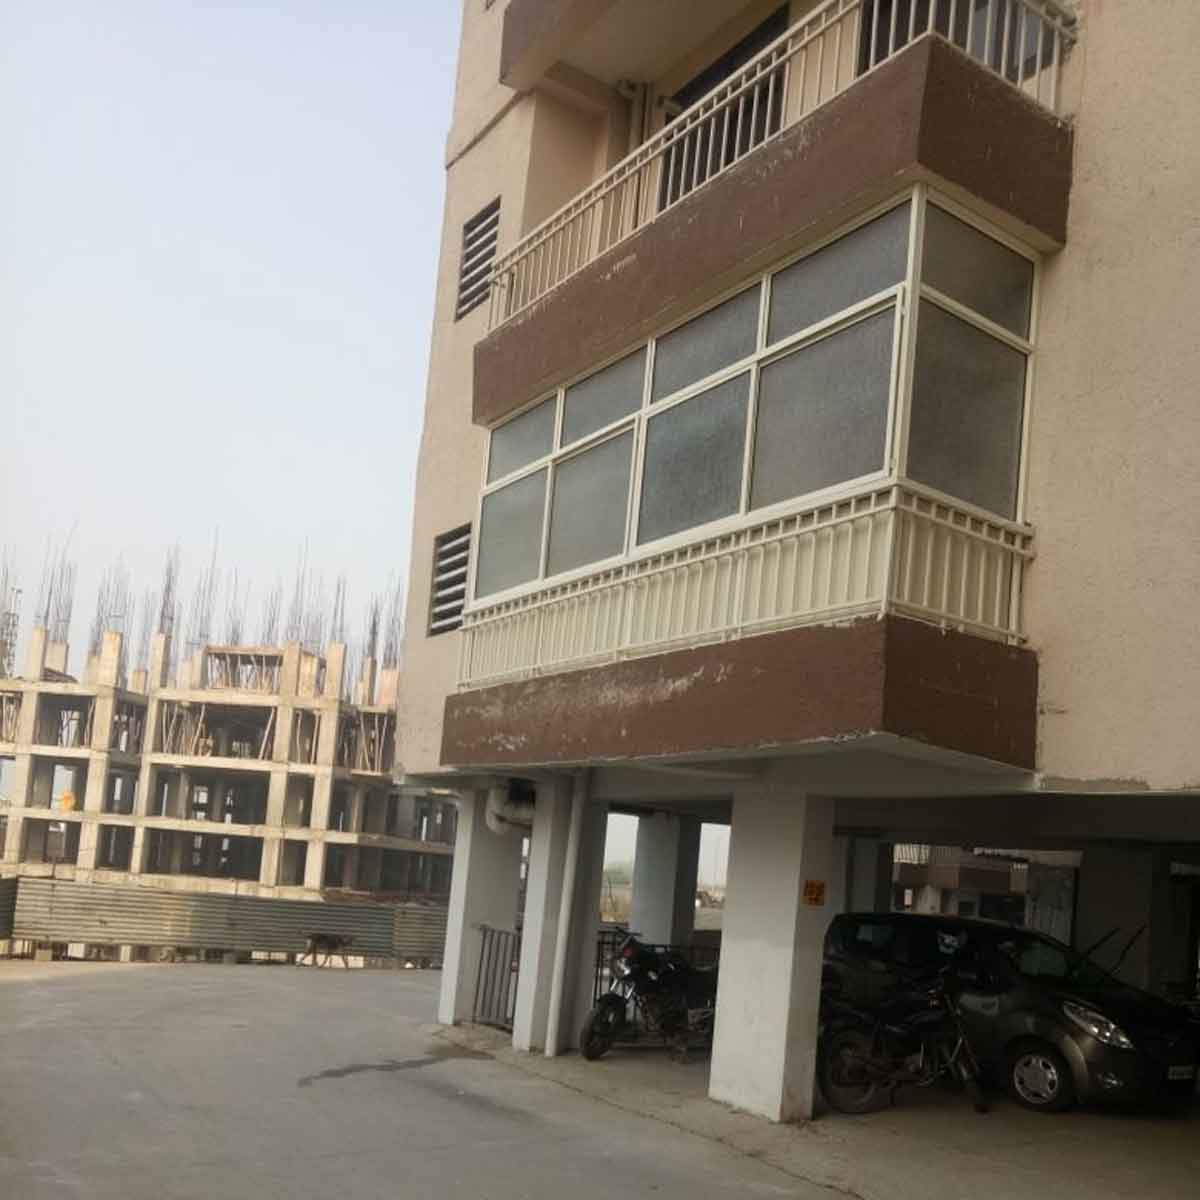 UPVC Aluminium Balcony Covering Manufacturers, Suppliers in Pilibhit